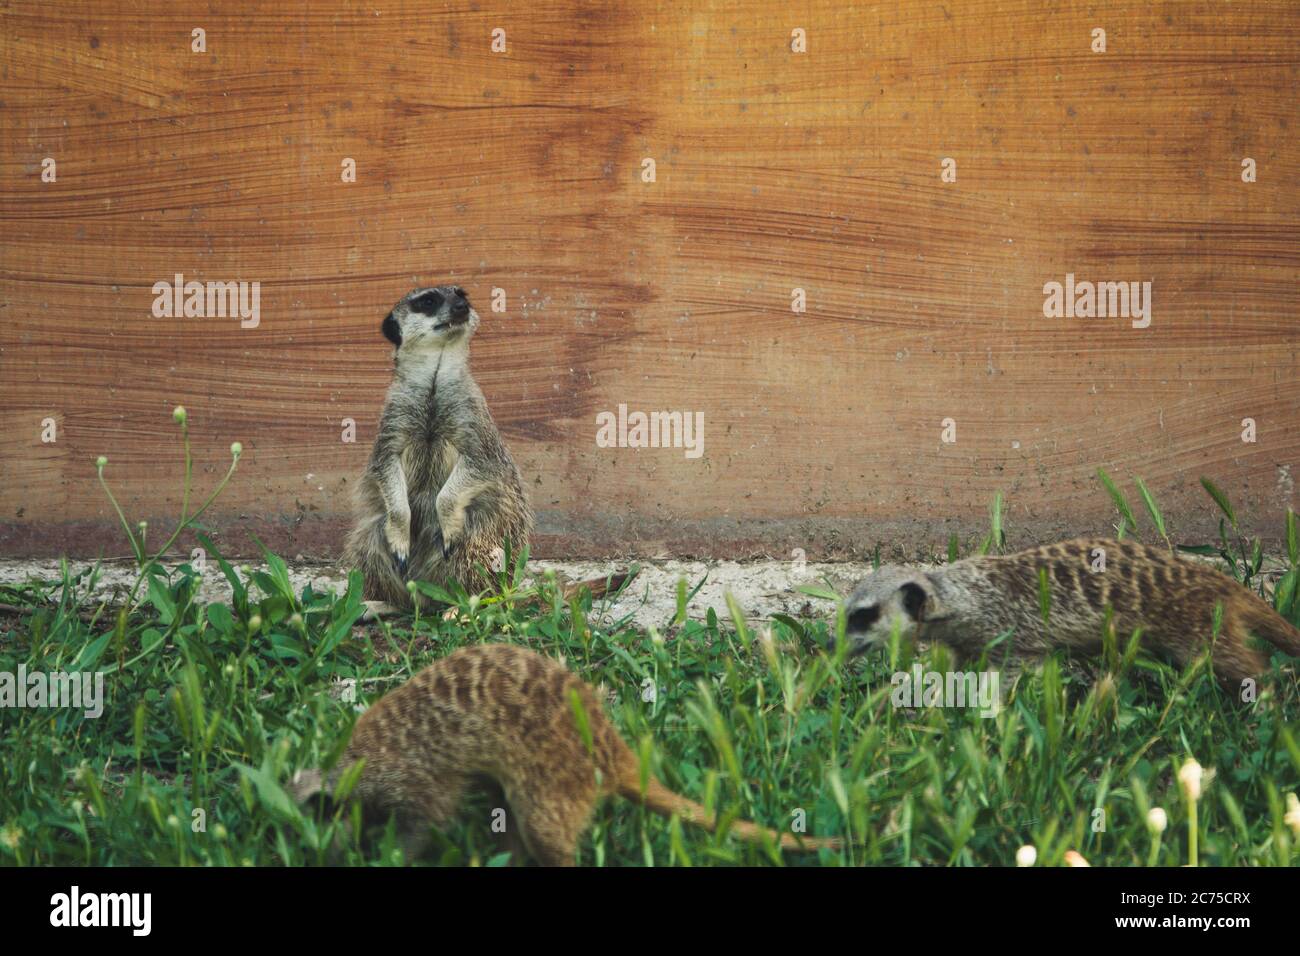 Meerkats watching around for safety and warning on ground. Stock Photo